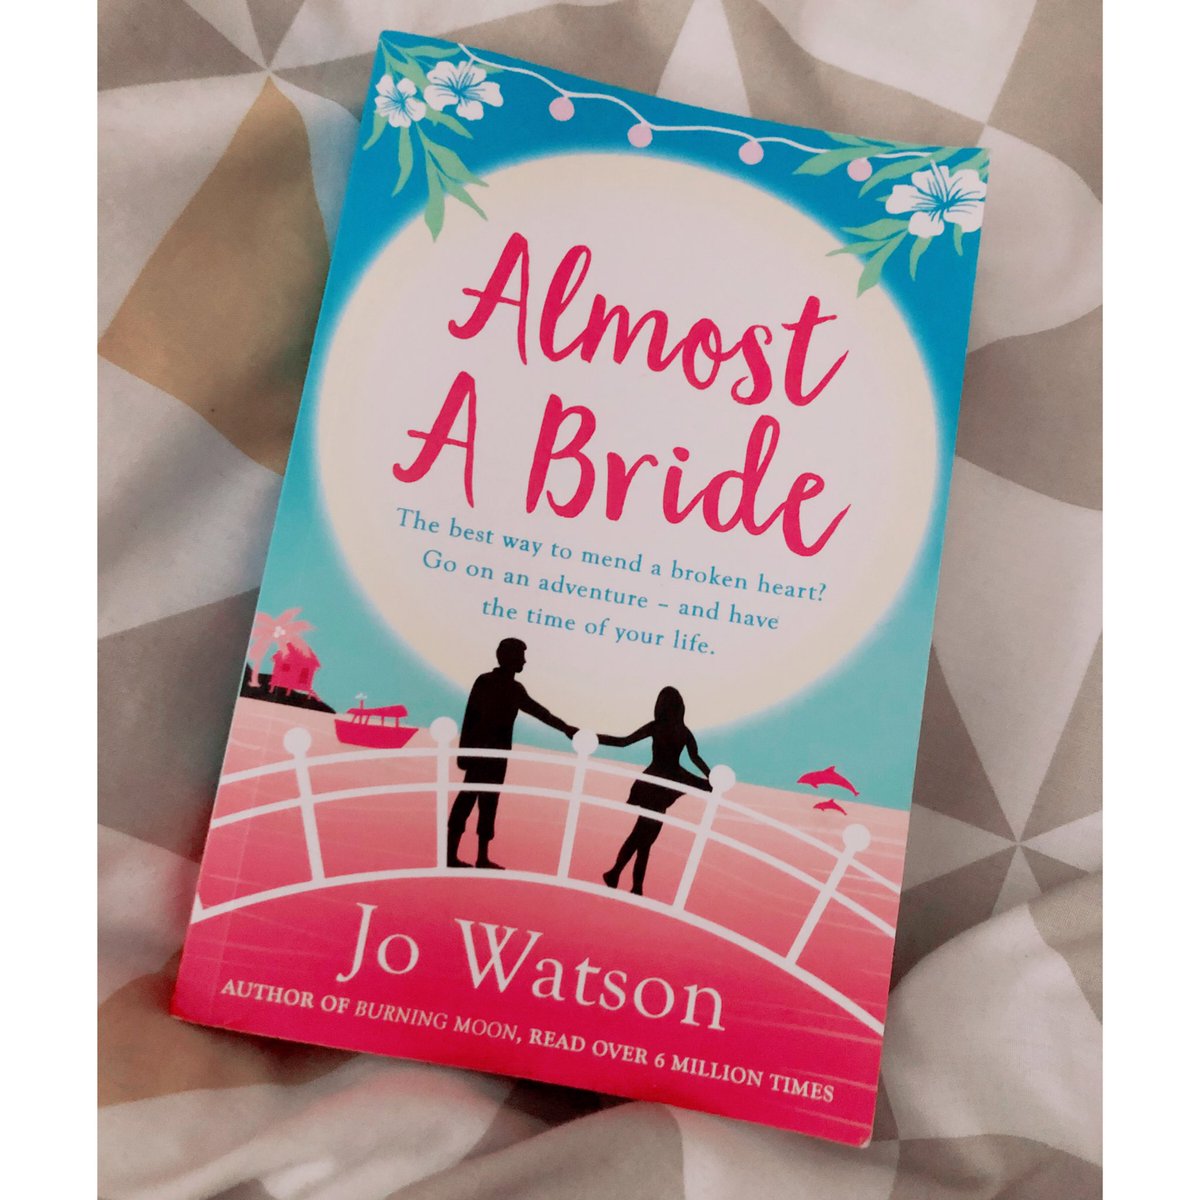 It’s only taken me 2 weeks to finish my 6th book of the year - Almost A Bride by @JoWatsonWrites! 💖 I absolutely adored the story from start to finish, and felt my emotions going on a rollercoaster throughout! I laughed, I loved, and I’m so glad I read it! ✨ #reading #books